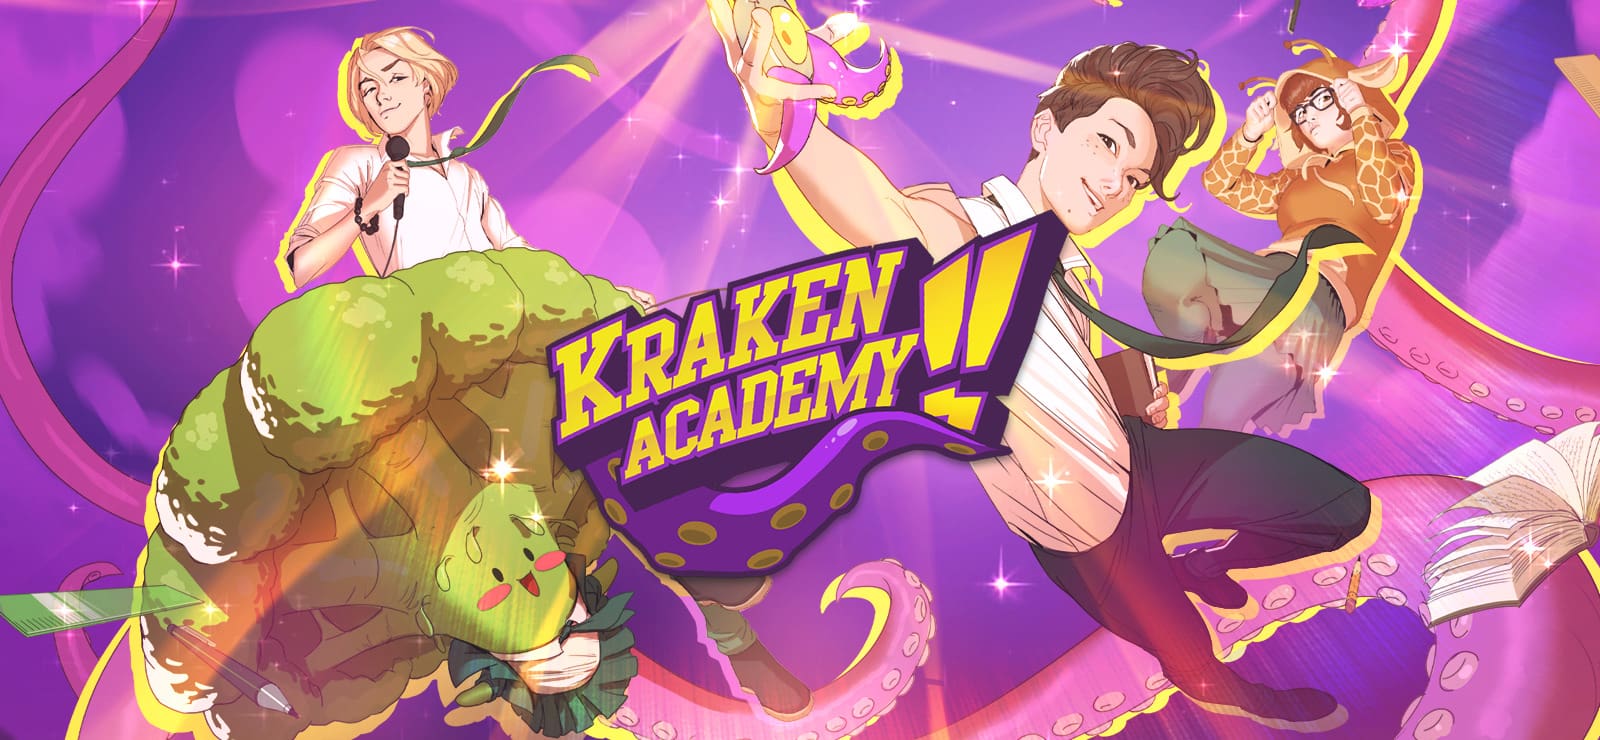 Read more about the article Kraken Academy!!